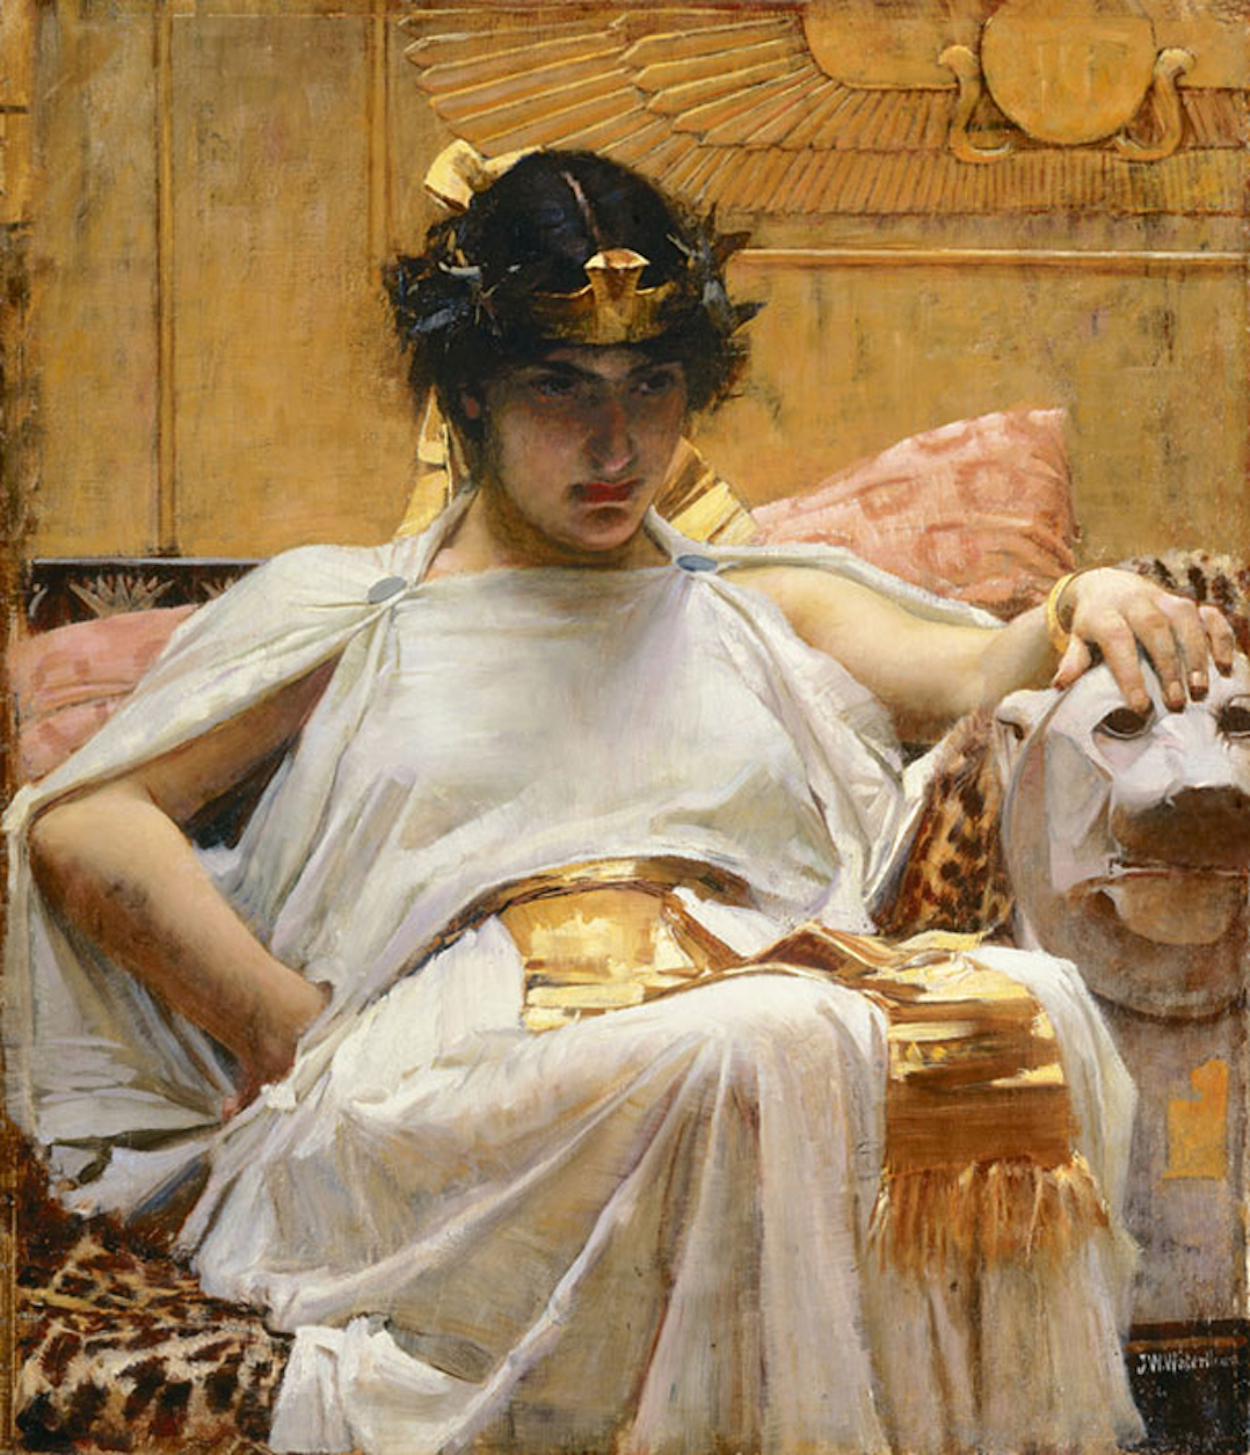 Cleopatra by John William Waterhouse - 1888 - 65 x 57 cm private collection